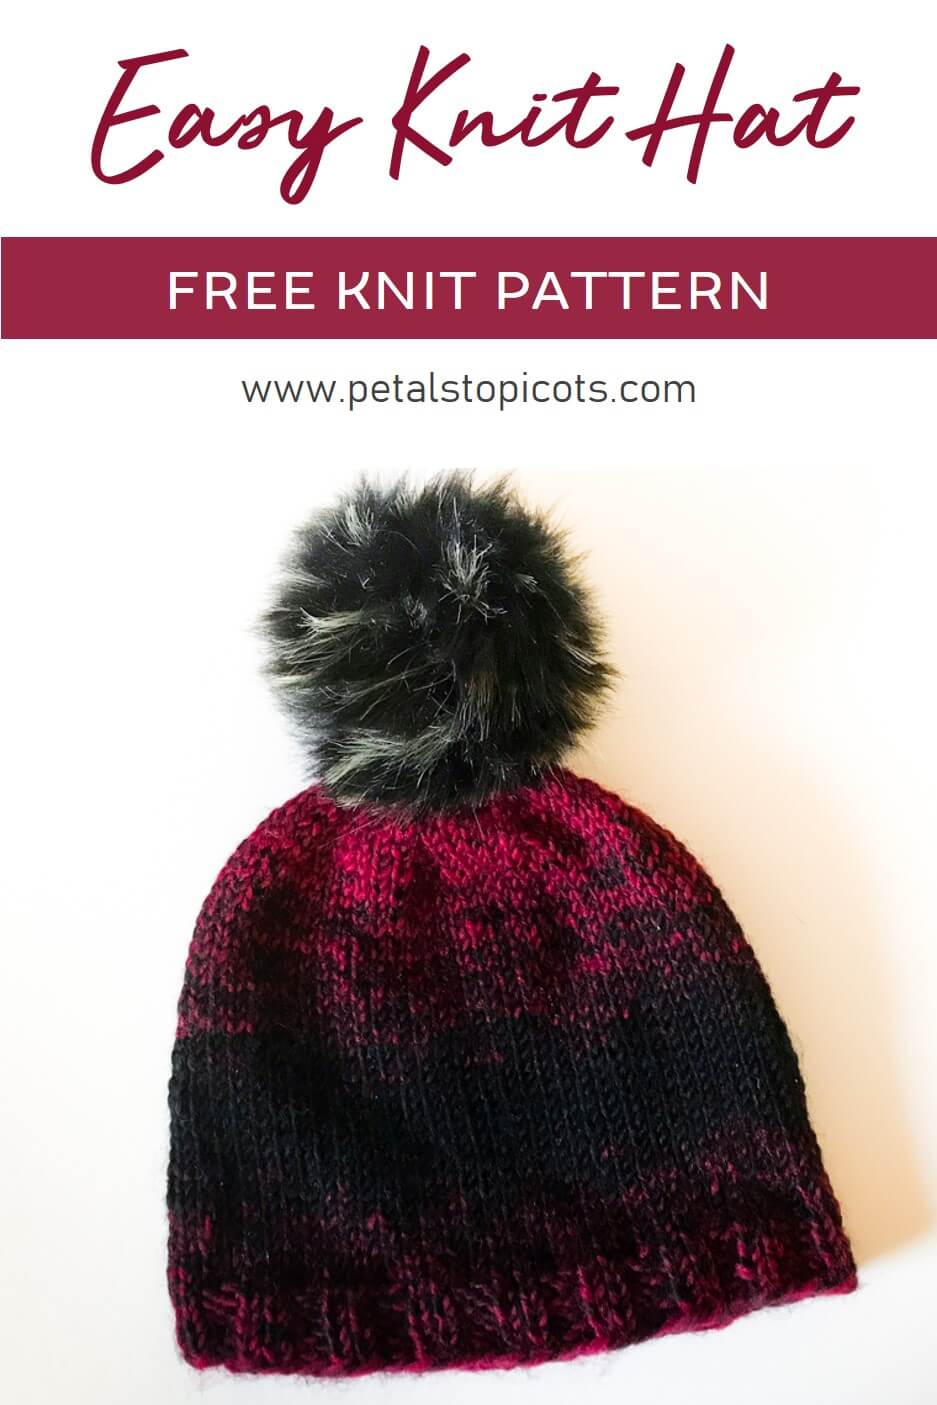 Easy Knit Hat Pattern For Beginners Easy Knit Hat Pattern For Beginners Petals To Picots